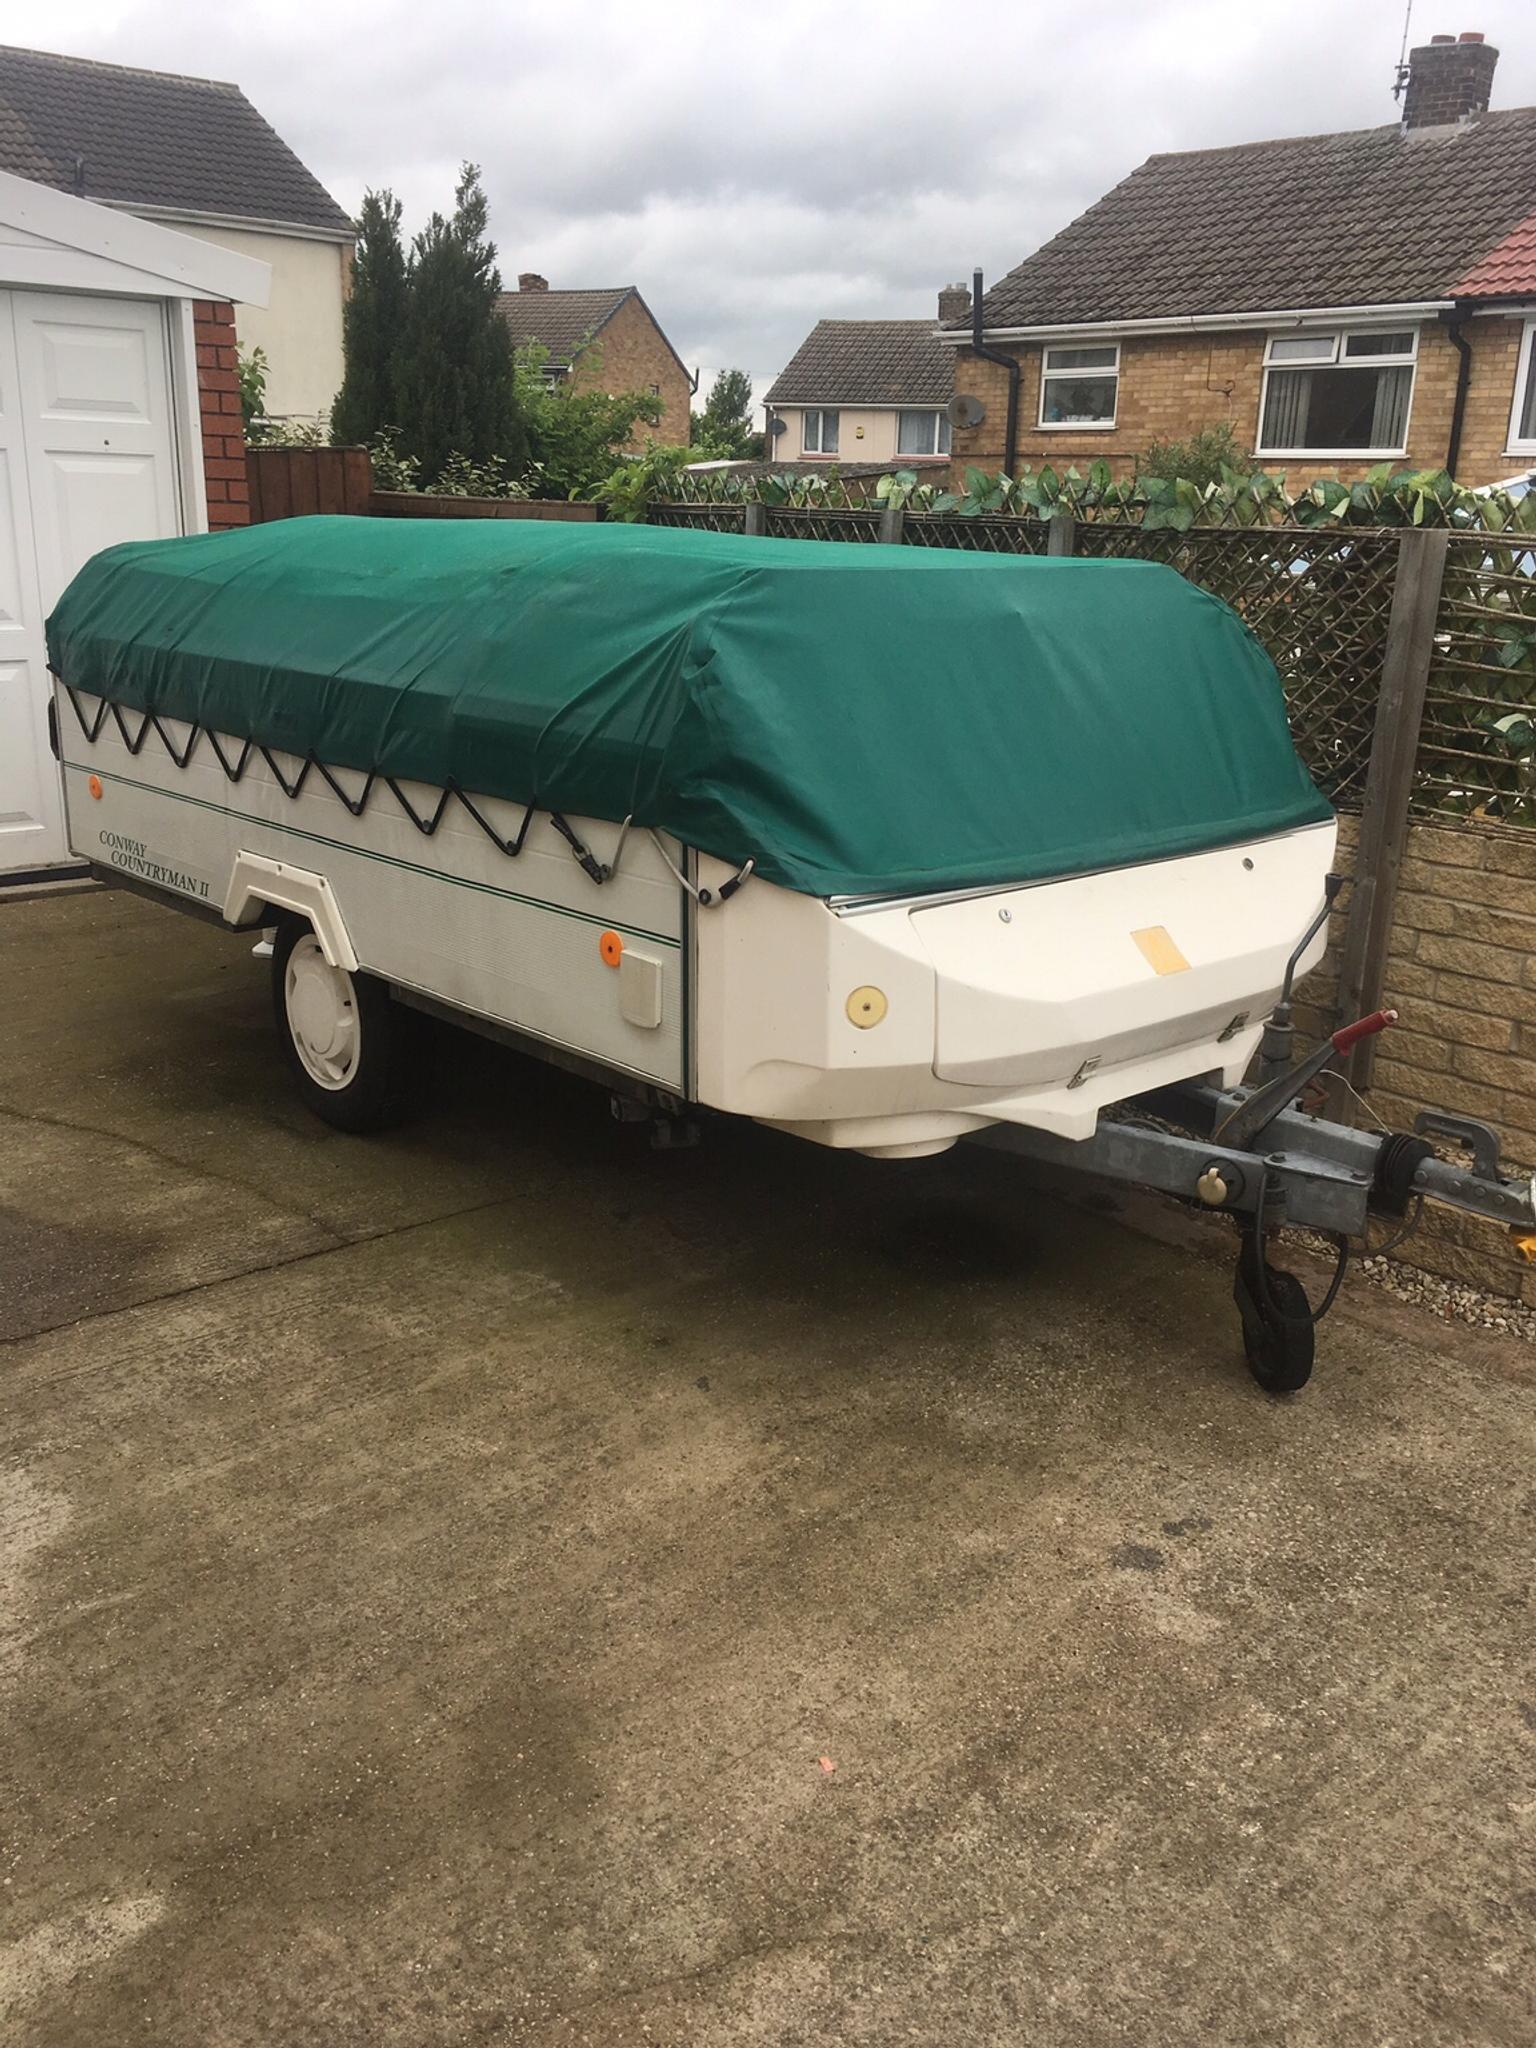 Conway Countryman 2 Trailer Tent In S40 North East Derbyshire For 750 00 For Sale Shpock